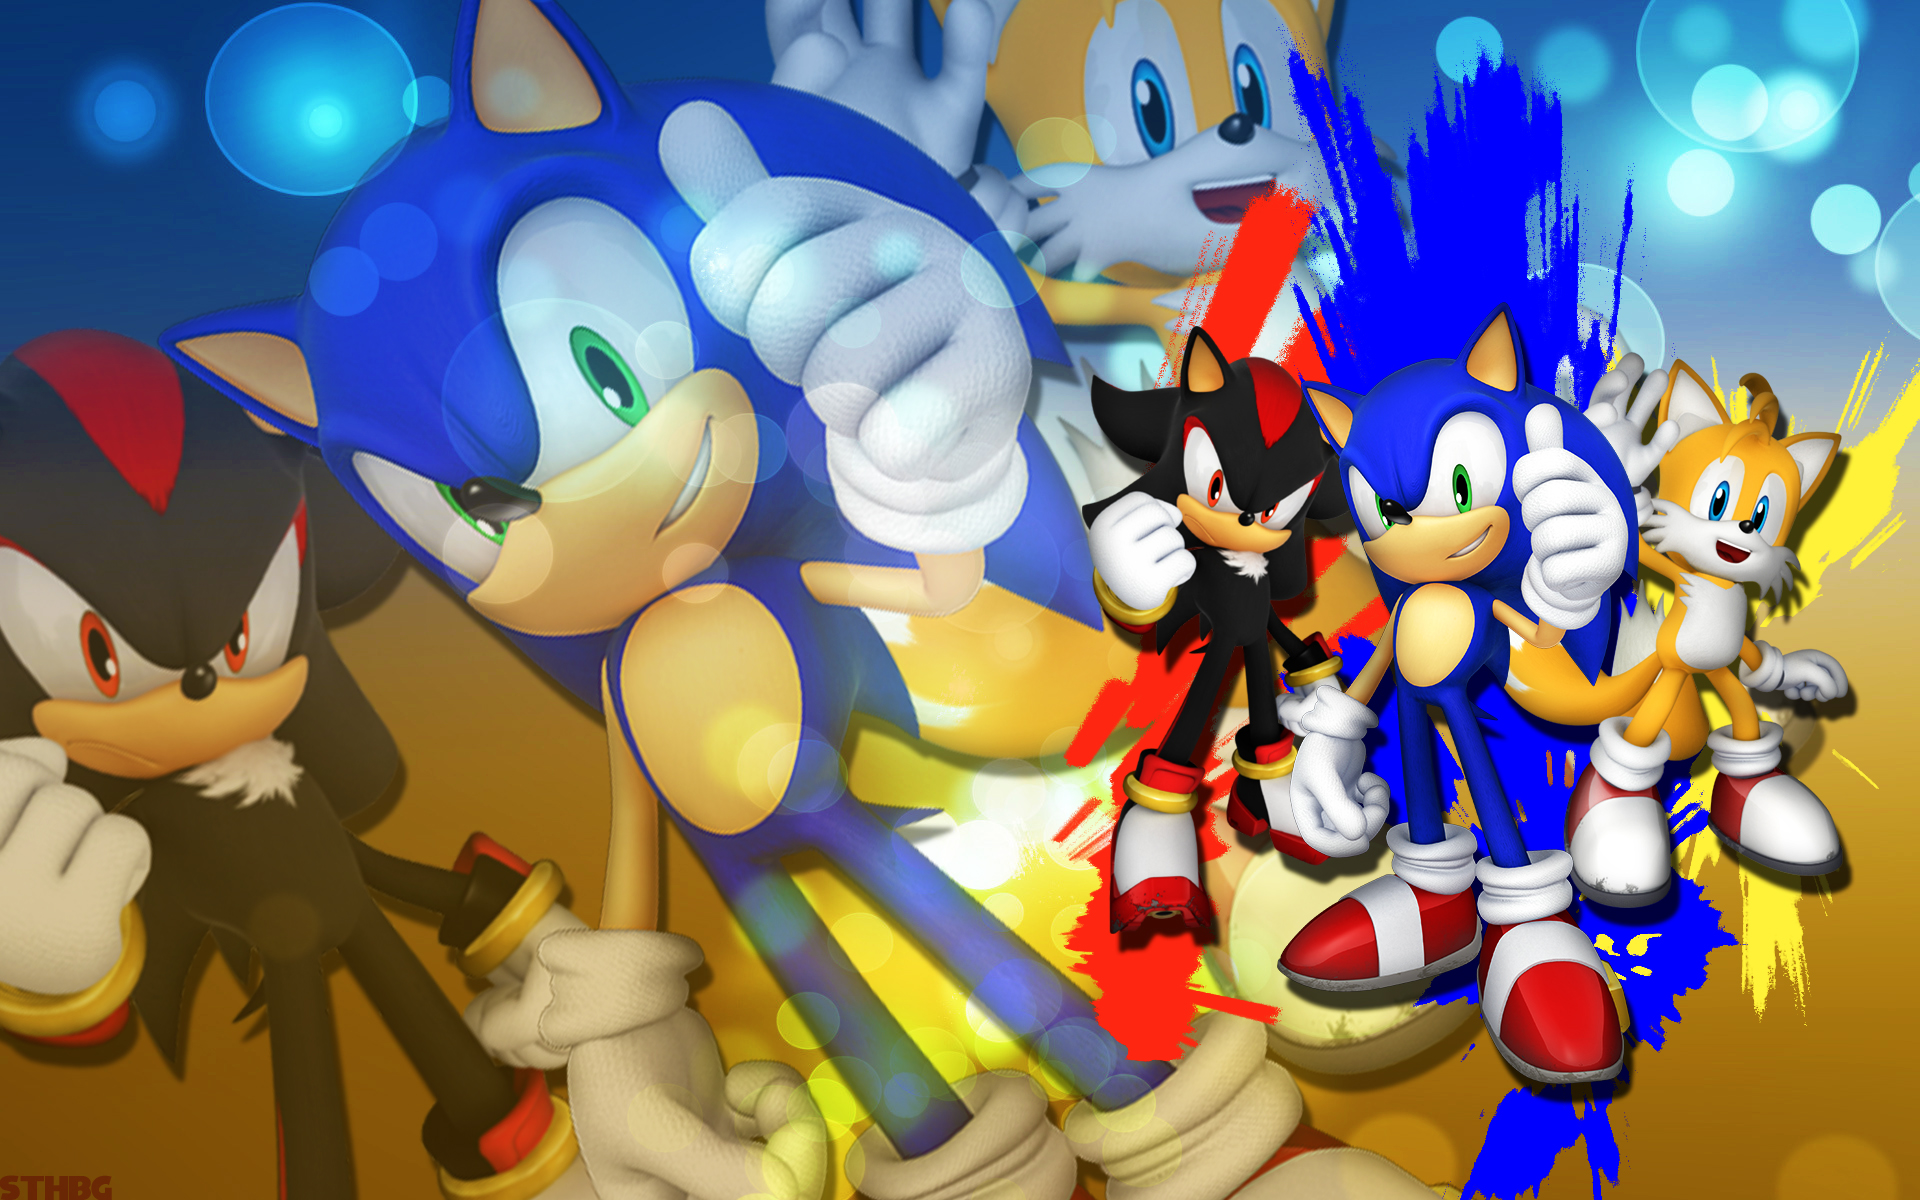 Sonic the Hedgehog, Tails, Shadow